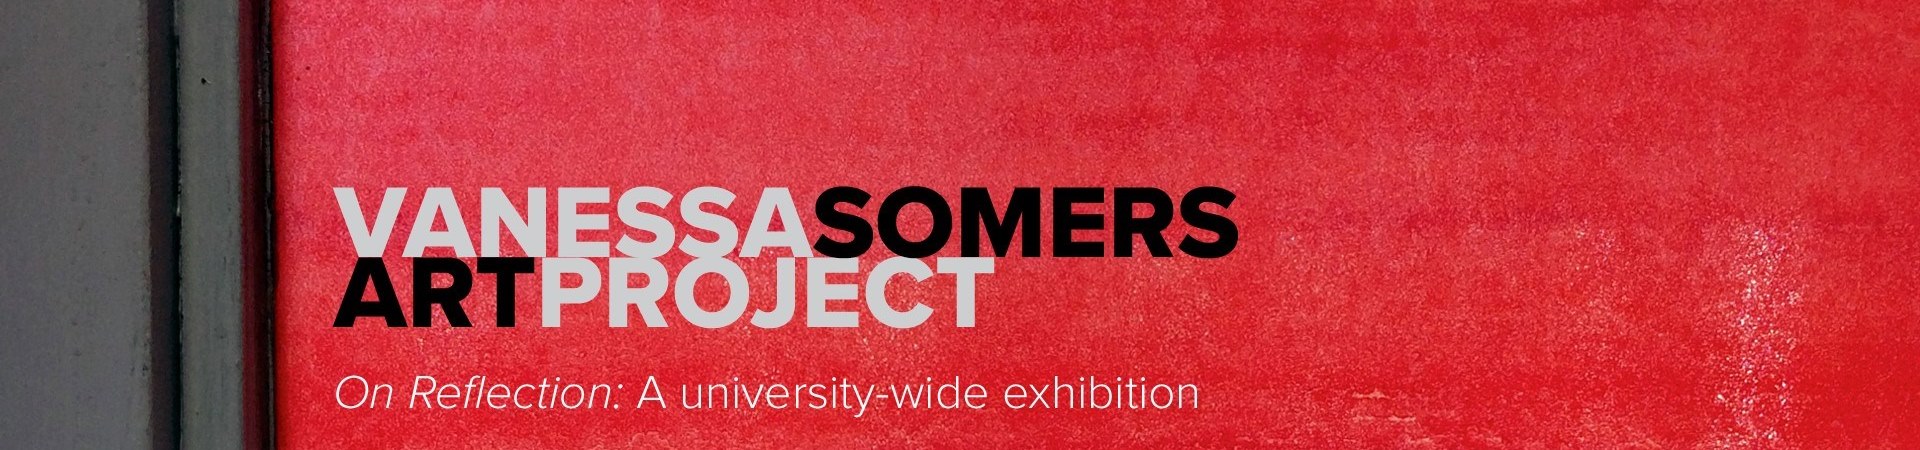 Events | Vanessa Somers Art Project | JCU Rome, Italy 